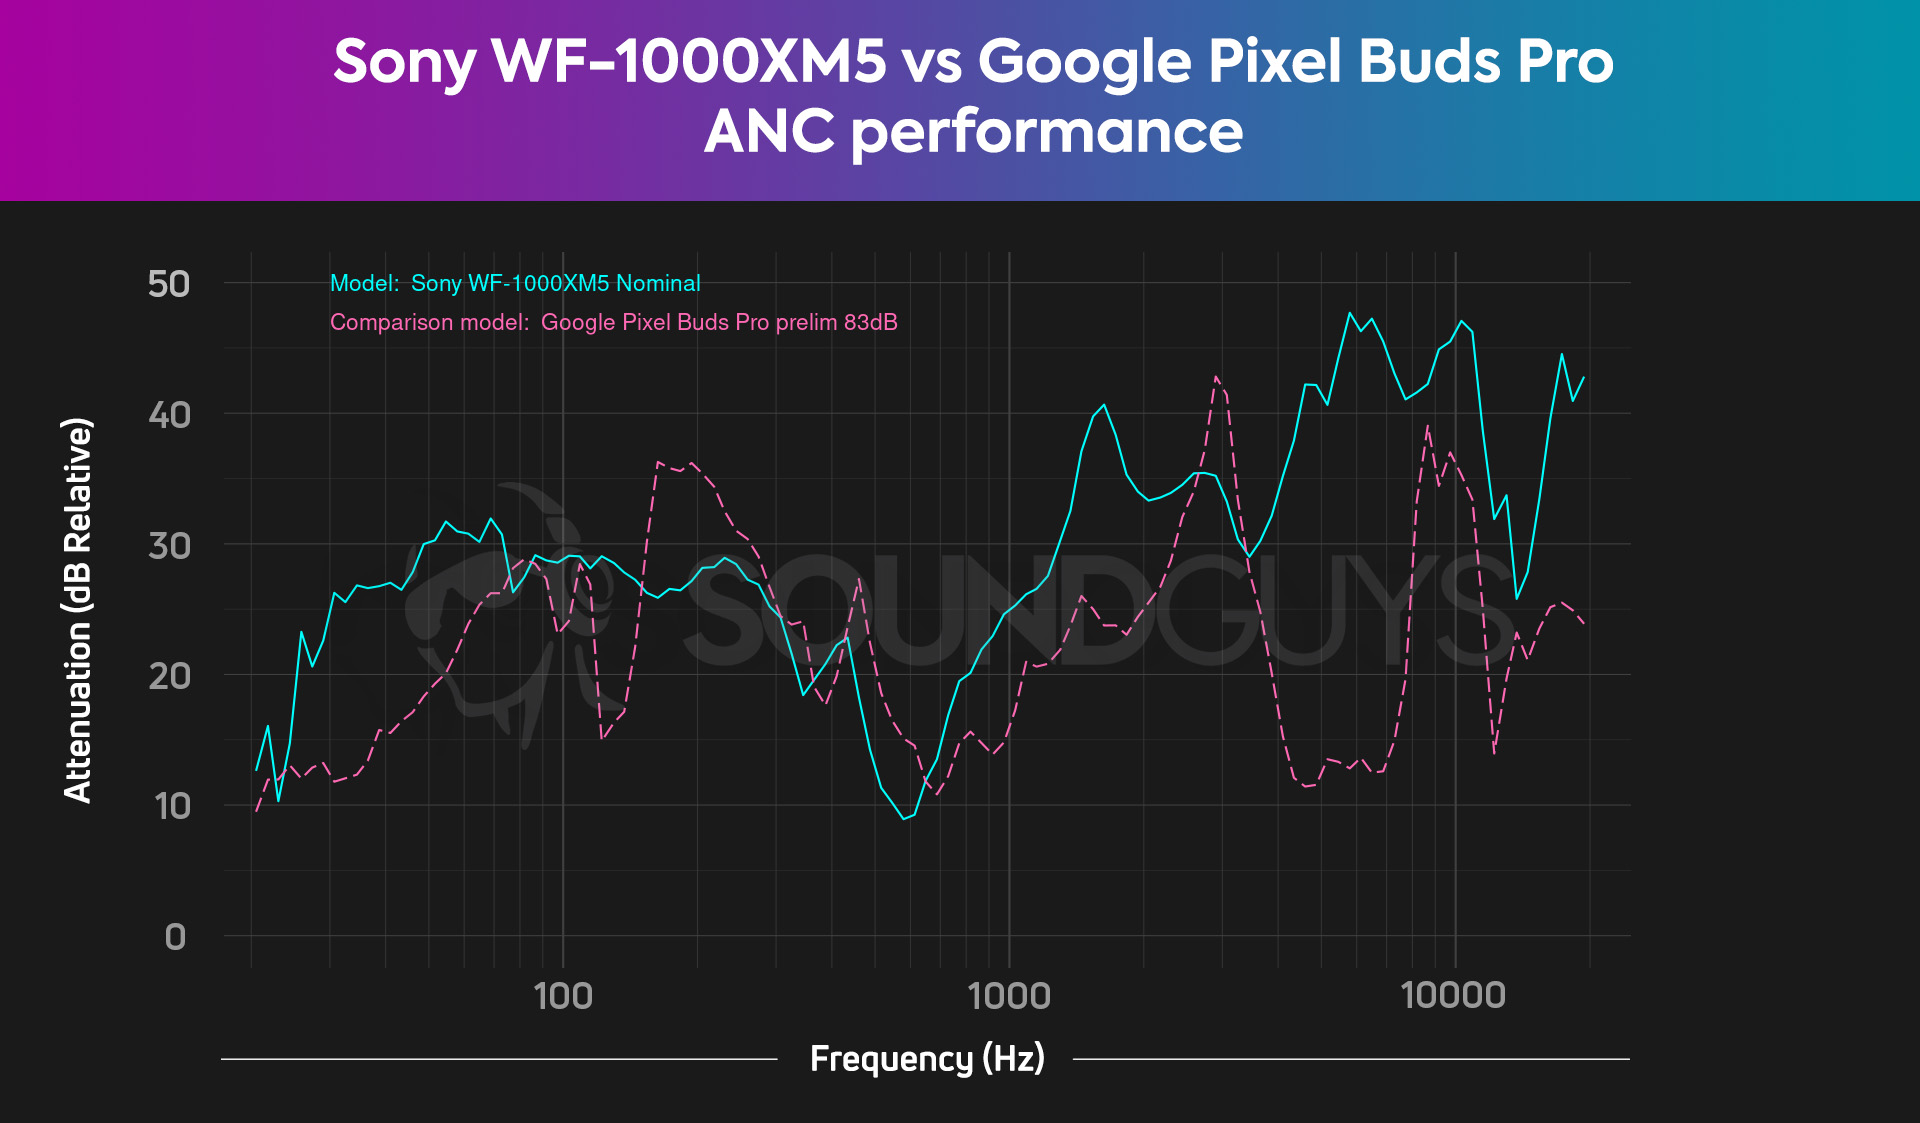 The Sony WF-1000XM5 vs Google Pixel Buds Pro noise attenuation chart, showing fairly comparable performance across the frequency spectrum, with a slight advantage to the Sony WF-1000XM5.